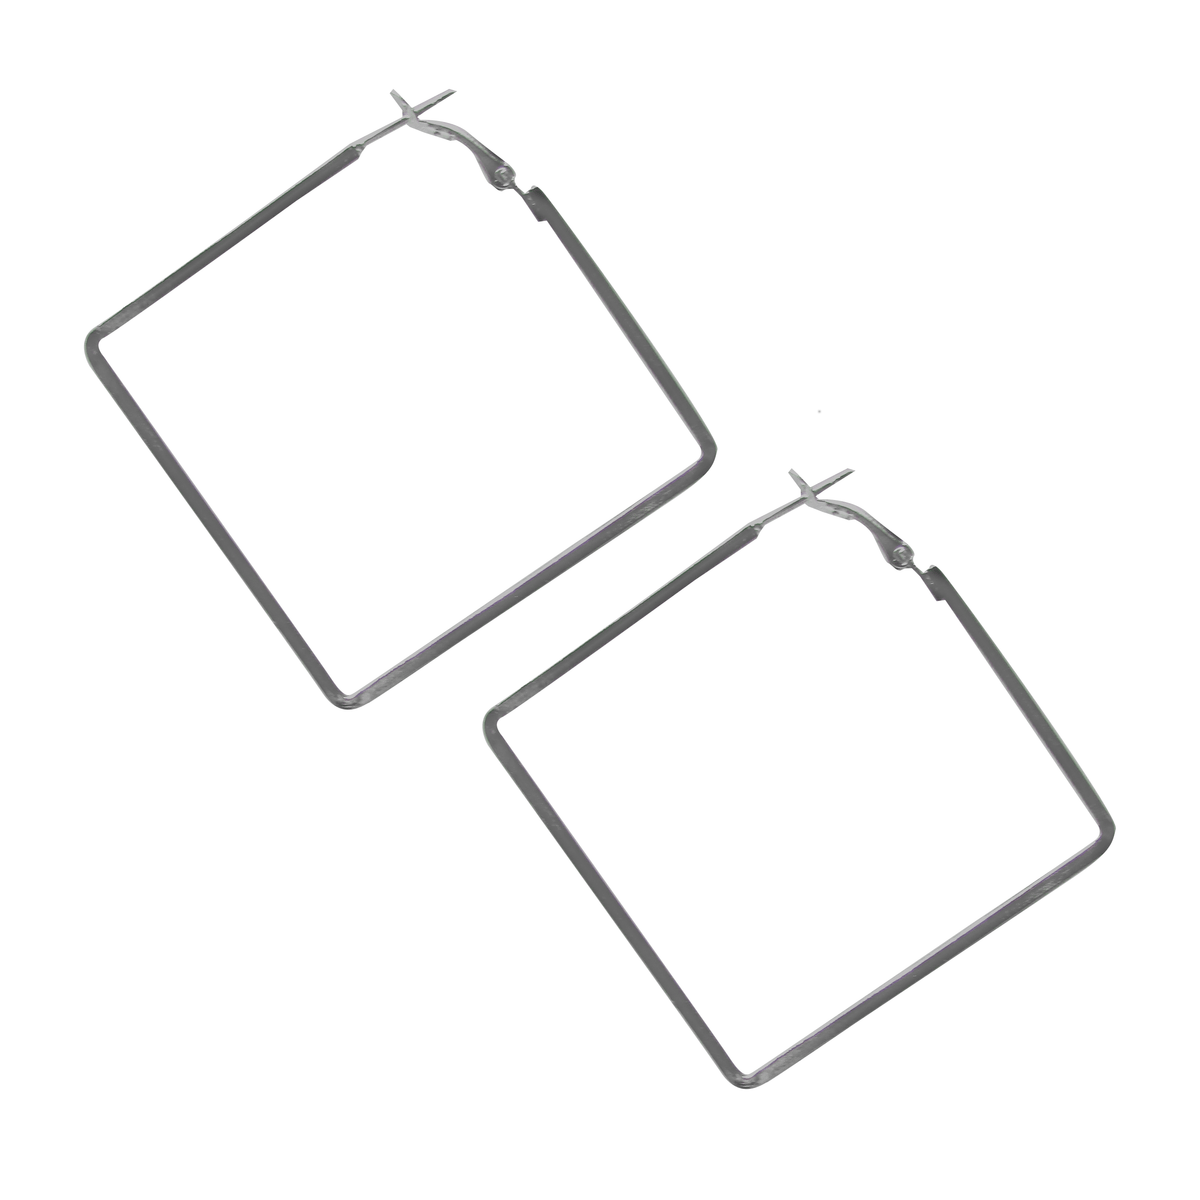 Minimalist Square Stainless Steel Hoop Earrings earrings A Moment Of Now Women’s Boutique Clothing Online Lifestyle Store